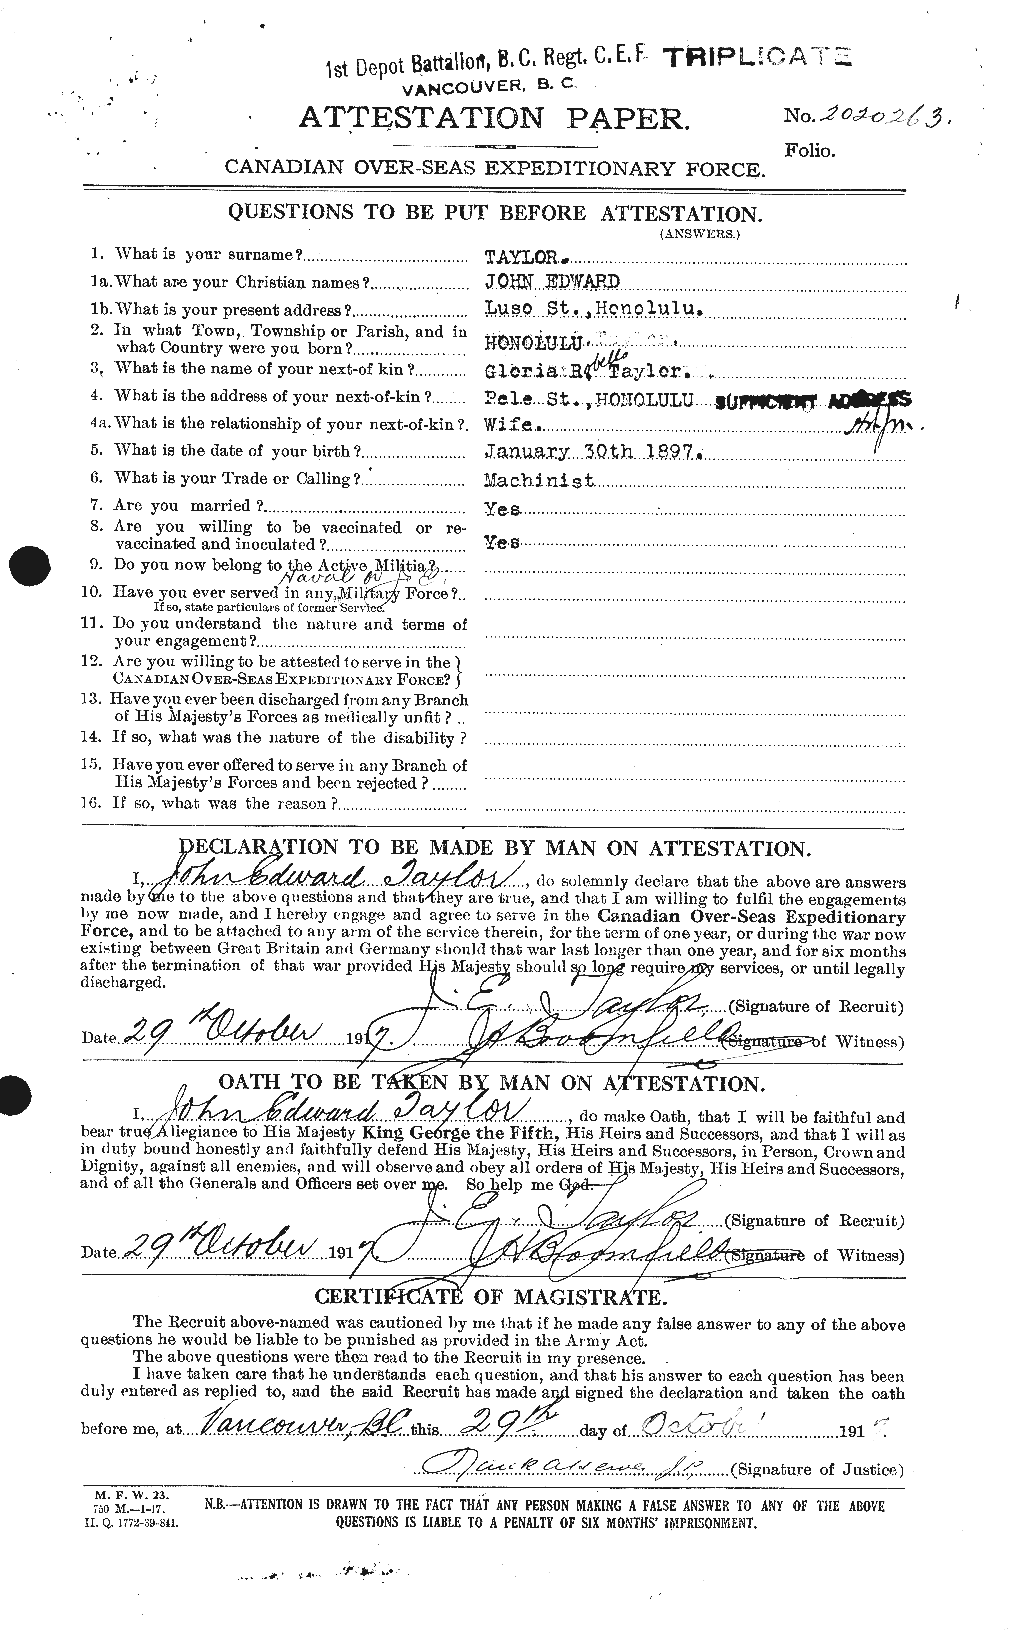 Personnel Records of the First World War - CEF 627081a